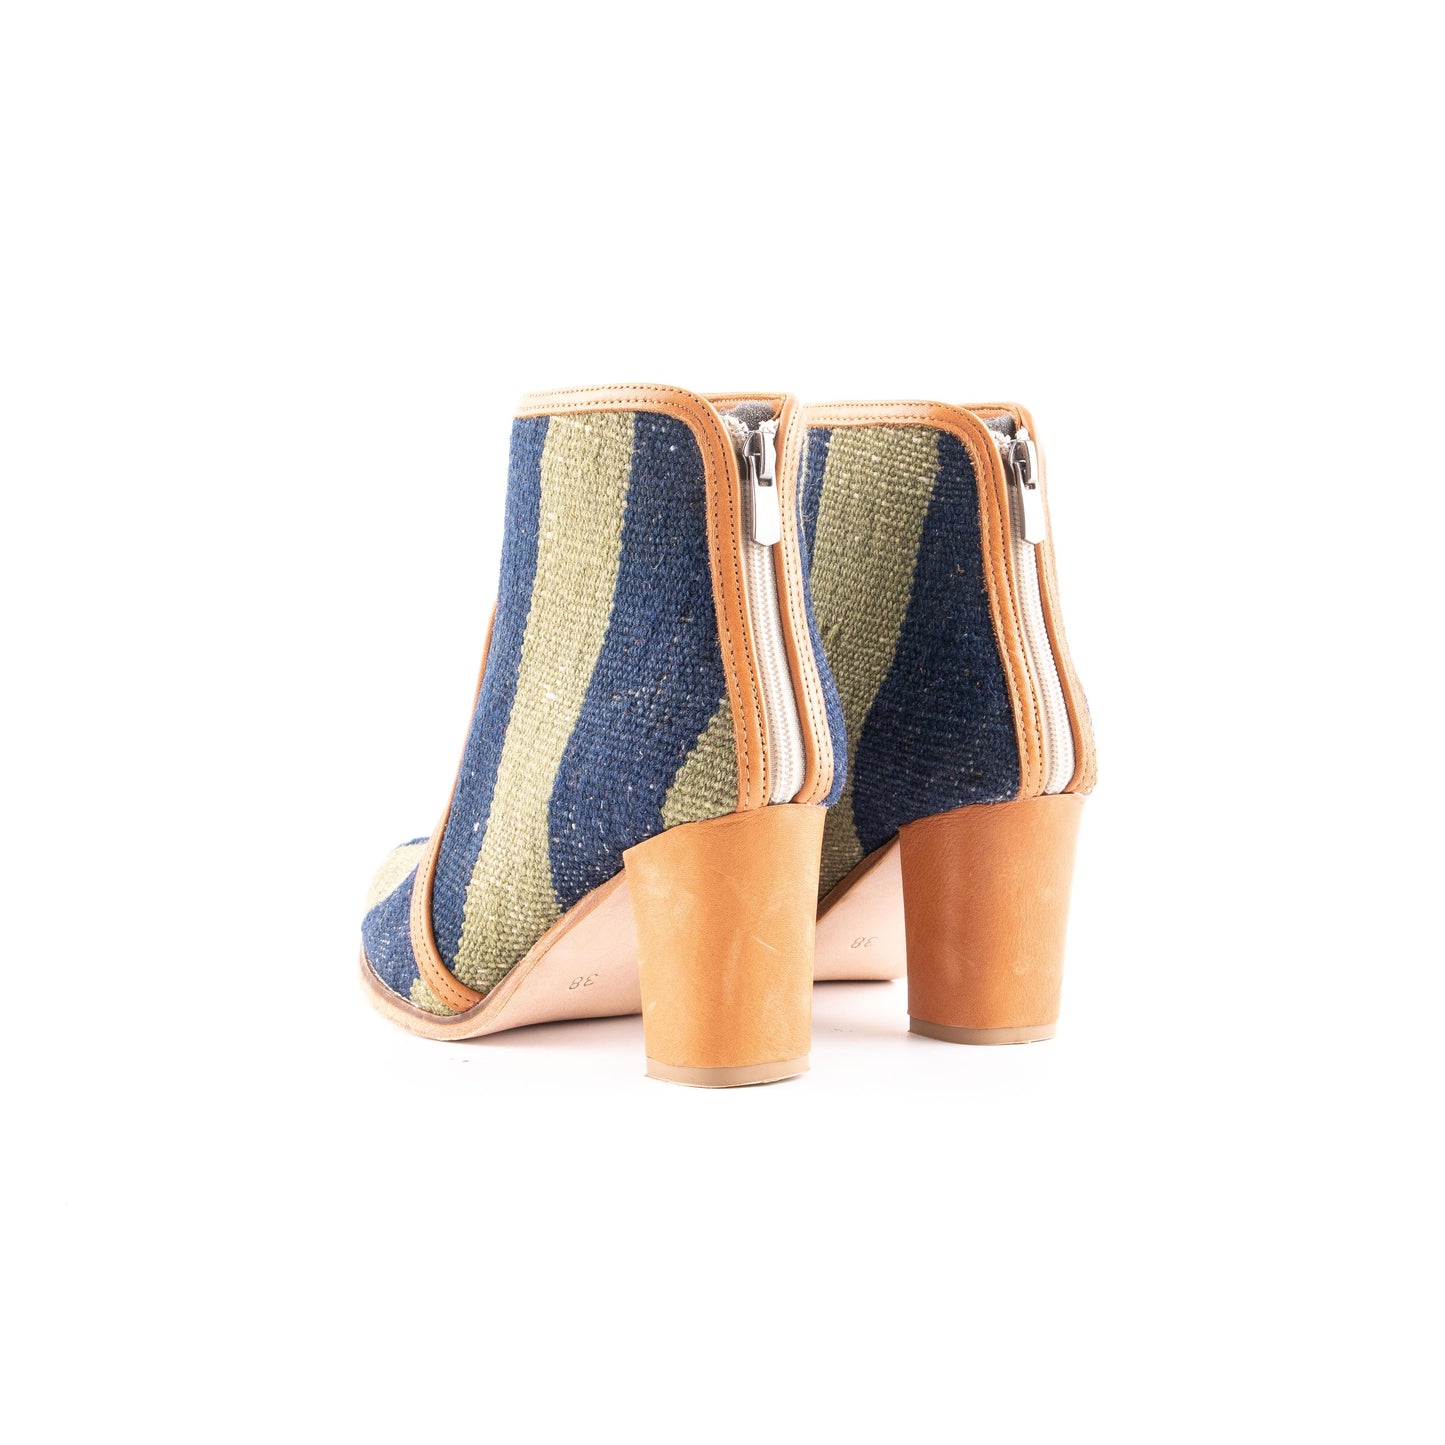 Ethnic Woman Heel Ankle Boot Crafted From Handmade Kilim and Real Leather Size 7.5 - Base Width: 8 cm - Base Length: 22 cm - Heel: 7 cm